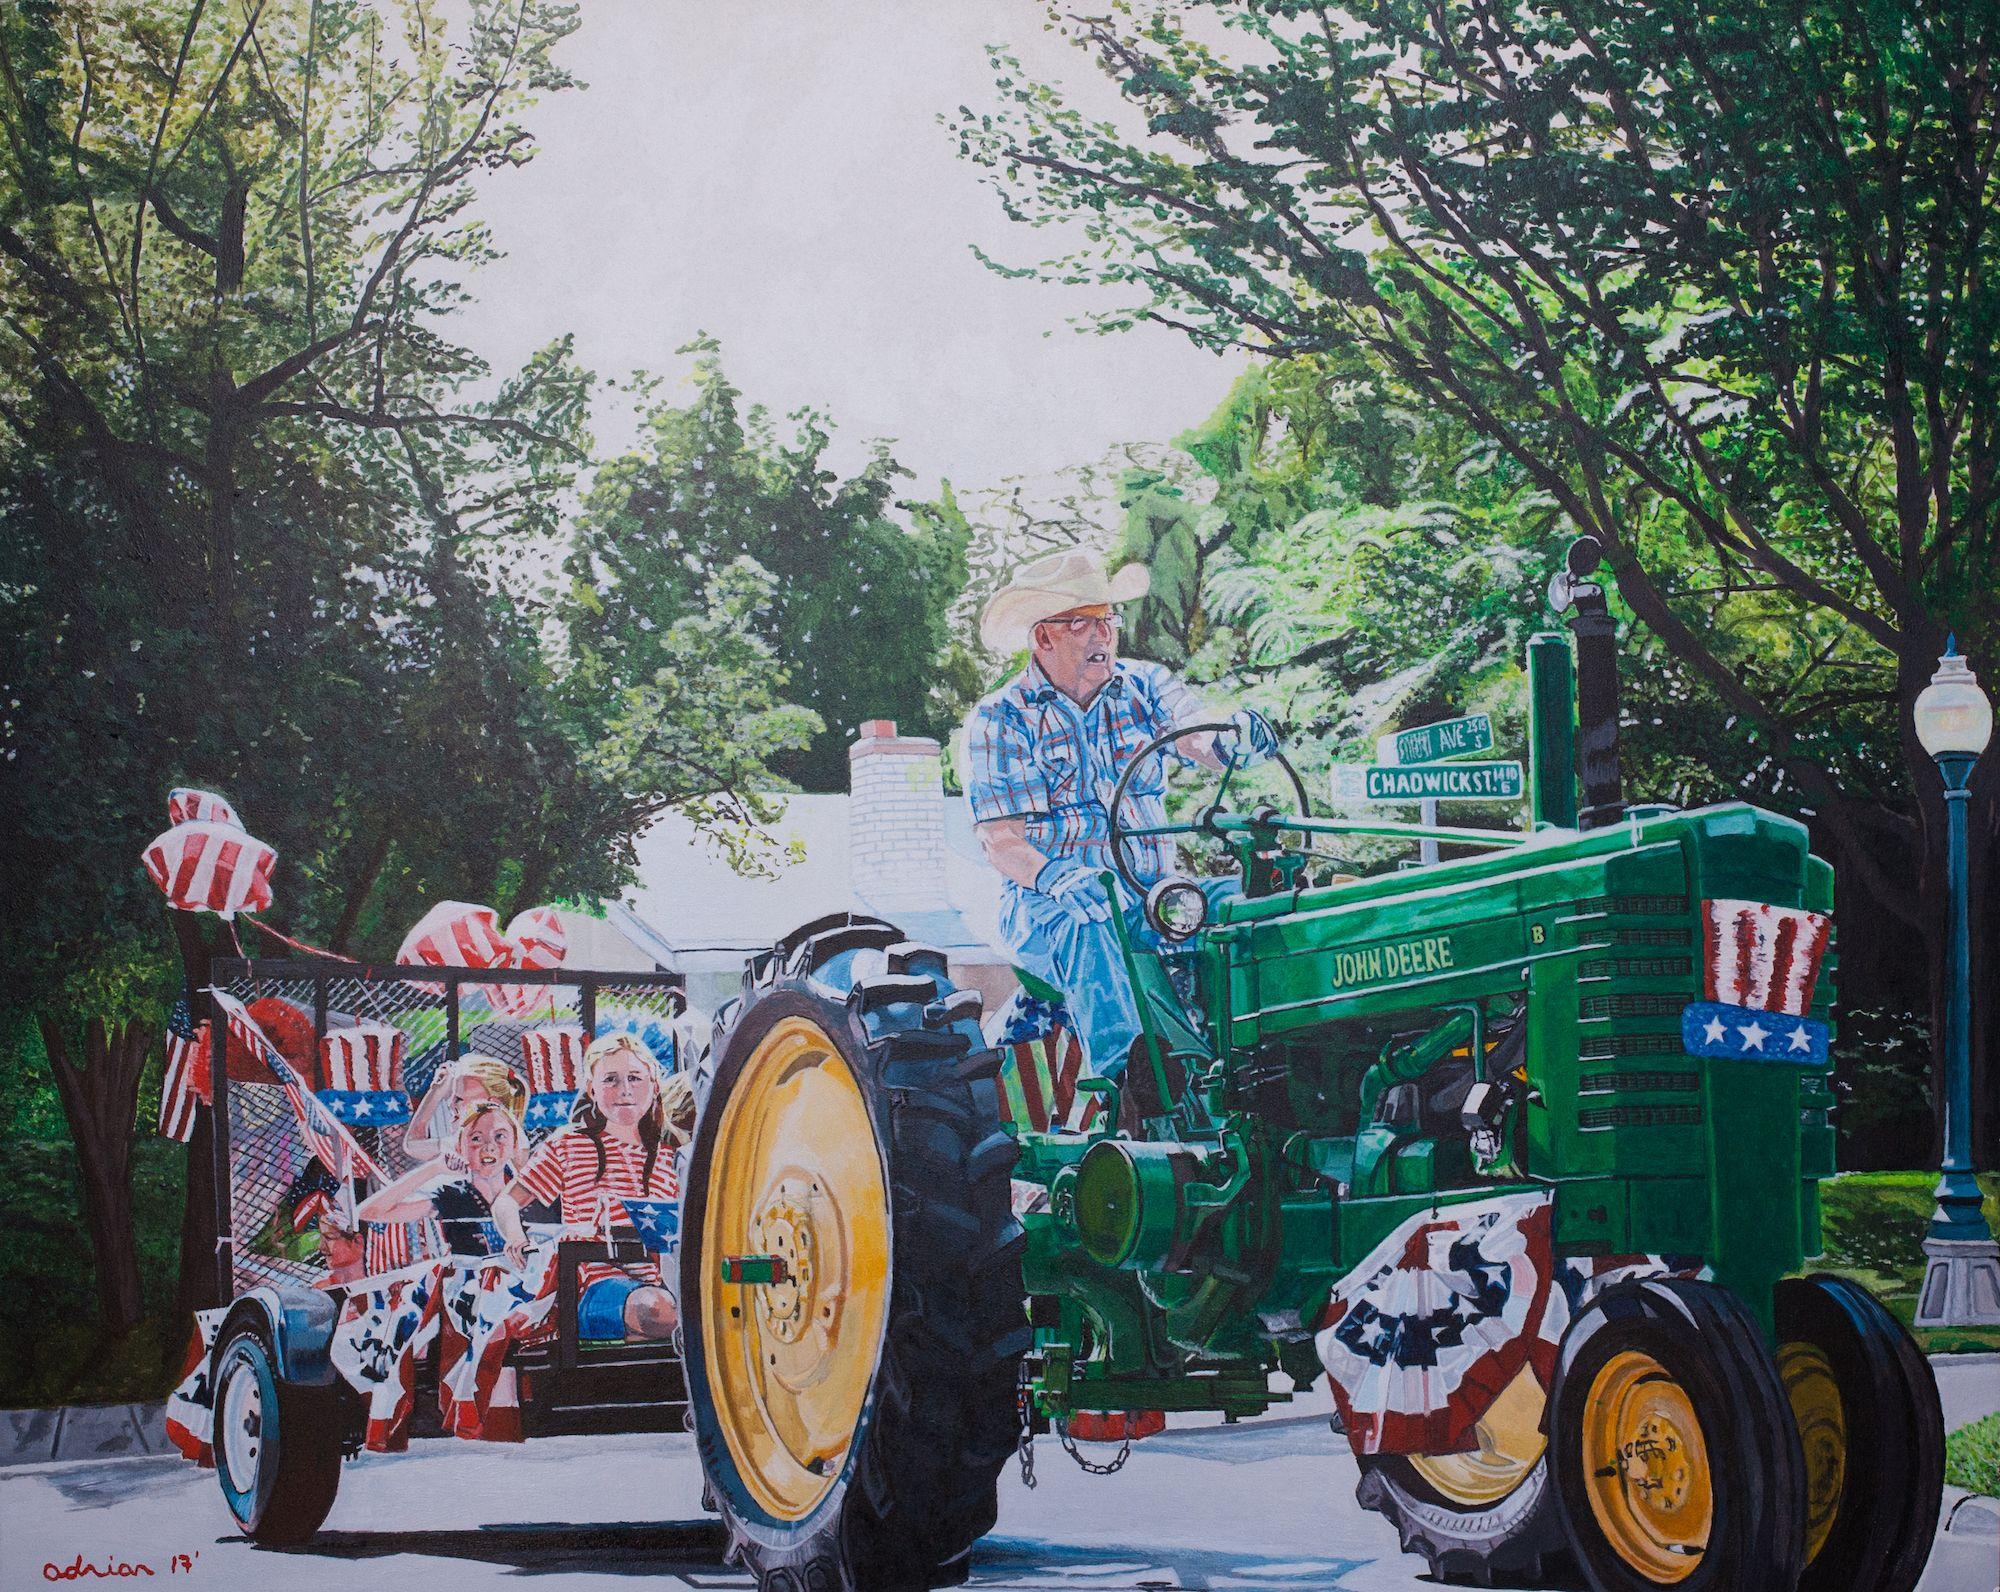 On the street that we live on there is a small 4th of July parade that takes place each year. This tractor is a part of it. I painted this from a photo that my niece took from my front yard. It harkens back to the small town parades that occur each